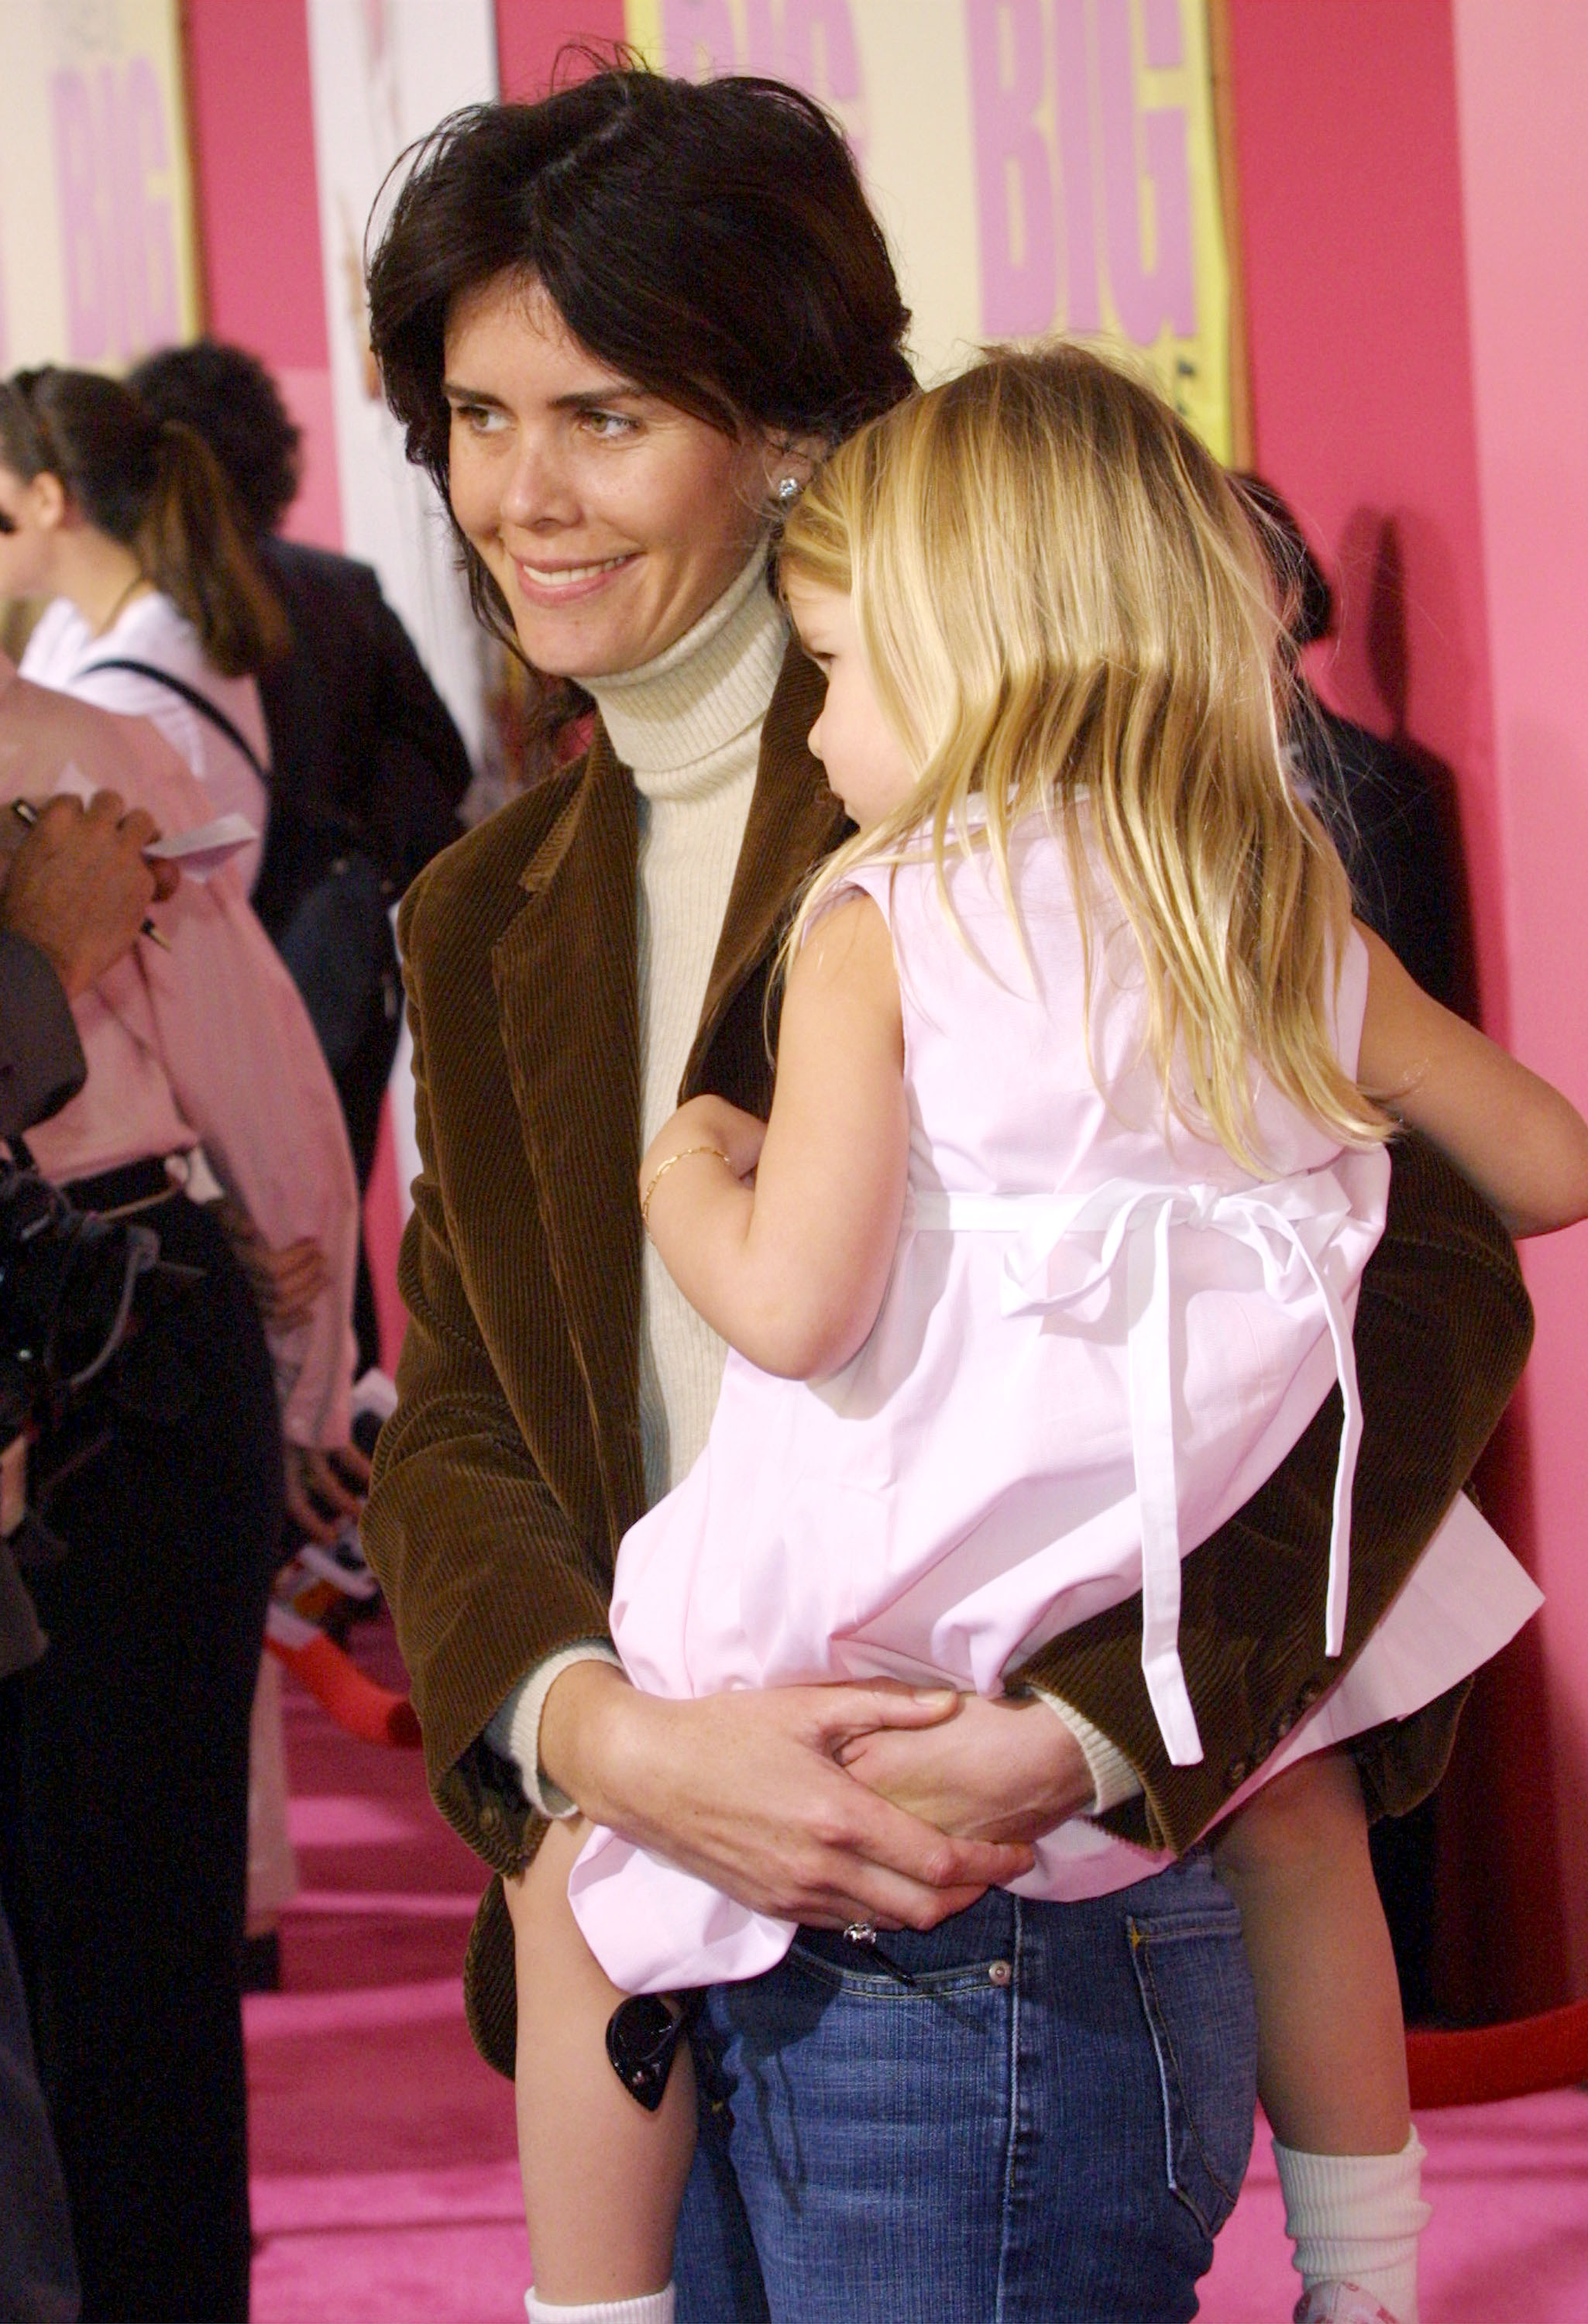 Kelley Phleger and her daughter at the film premiere of "Piglet's Big Movie" on March 16, 2003, in Hollywood, California | Source: Getty Images